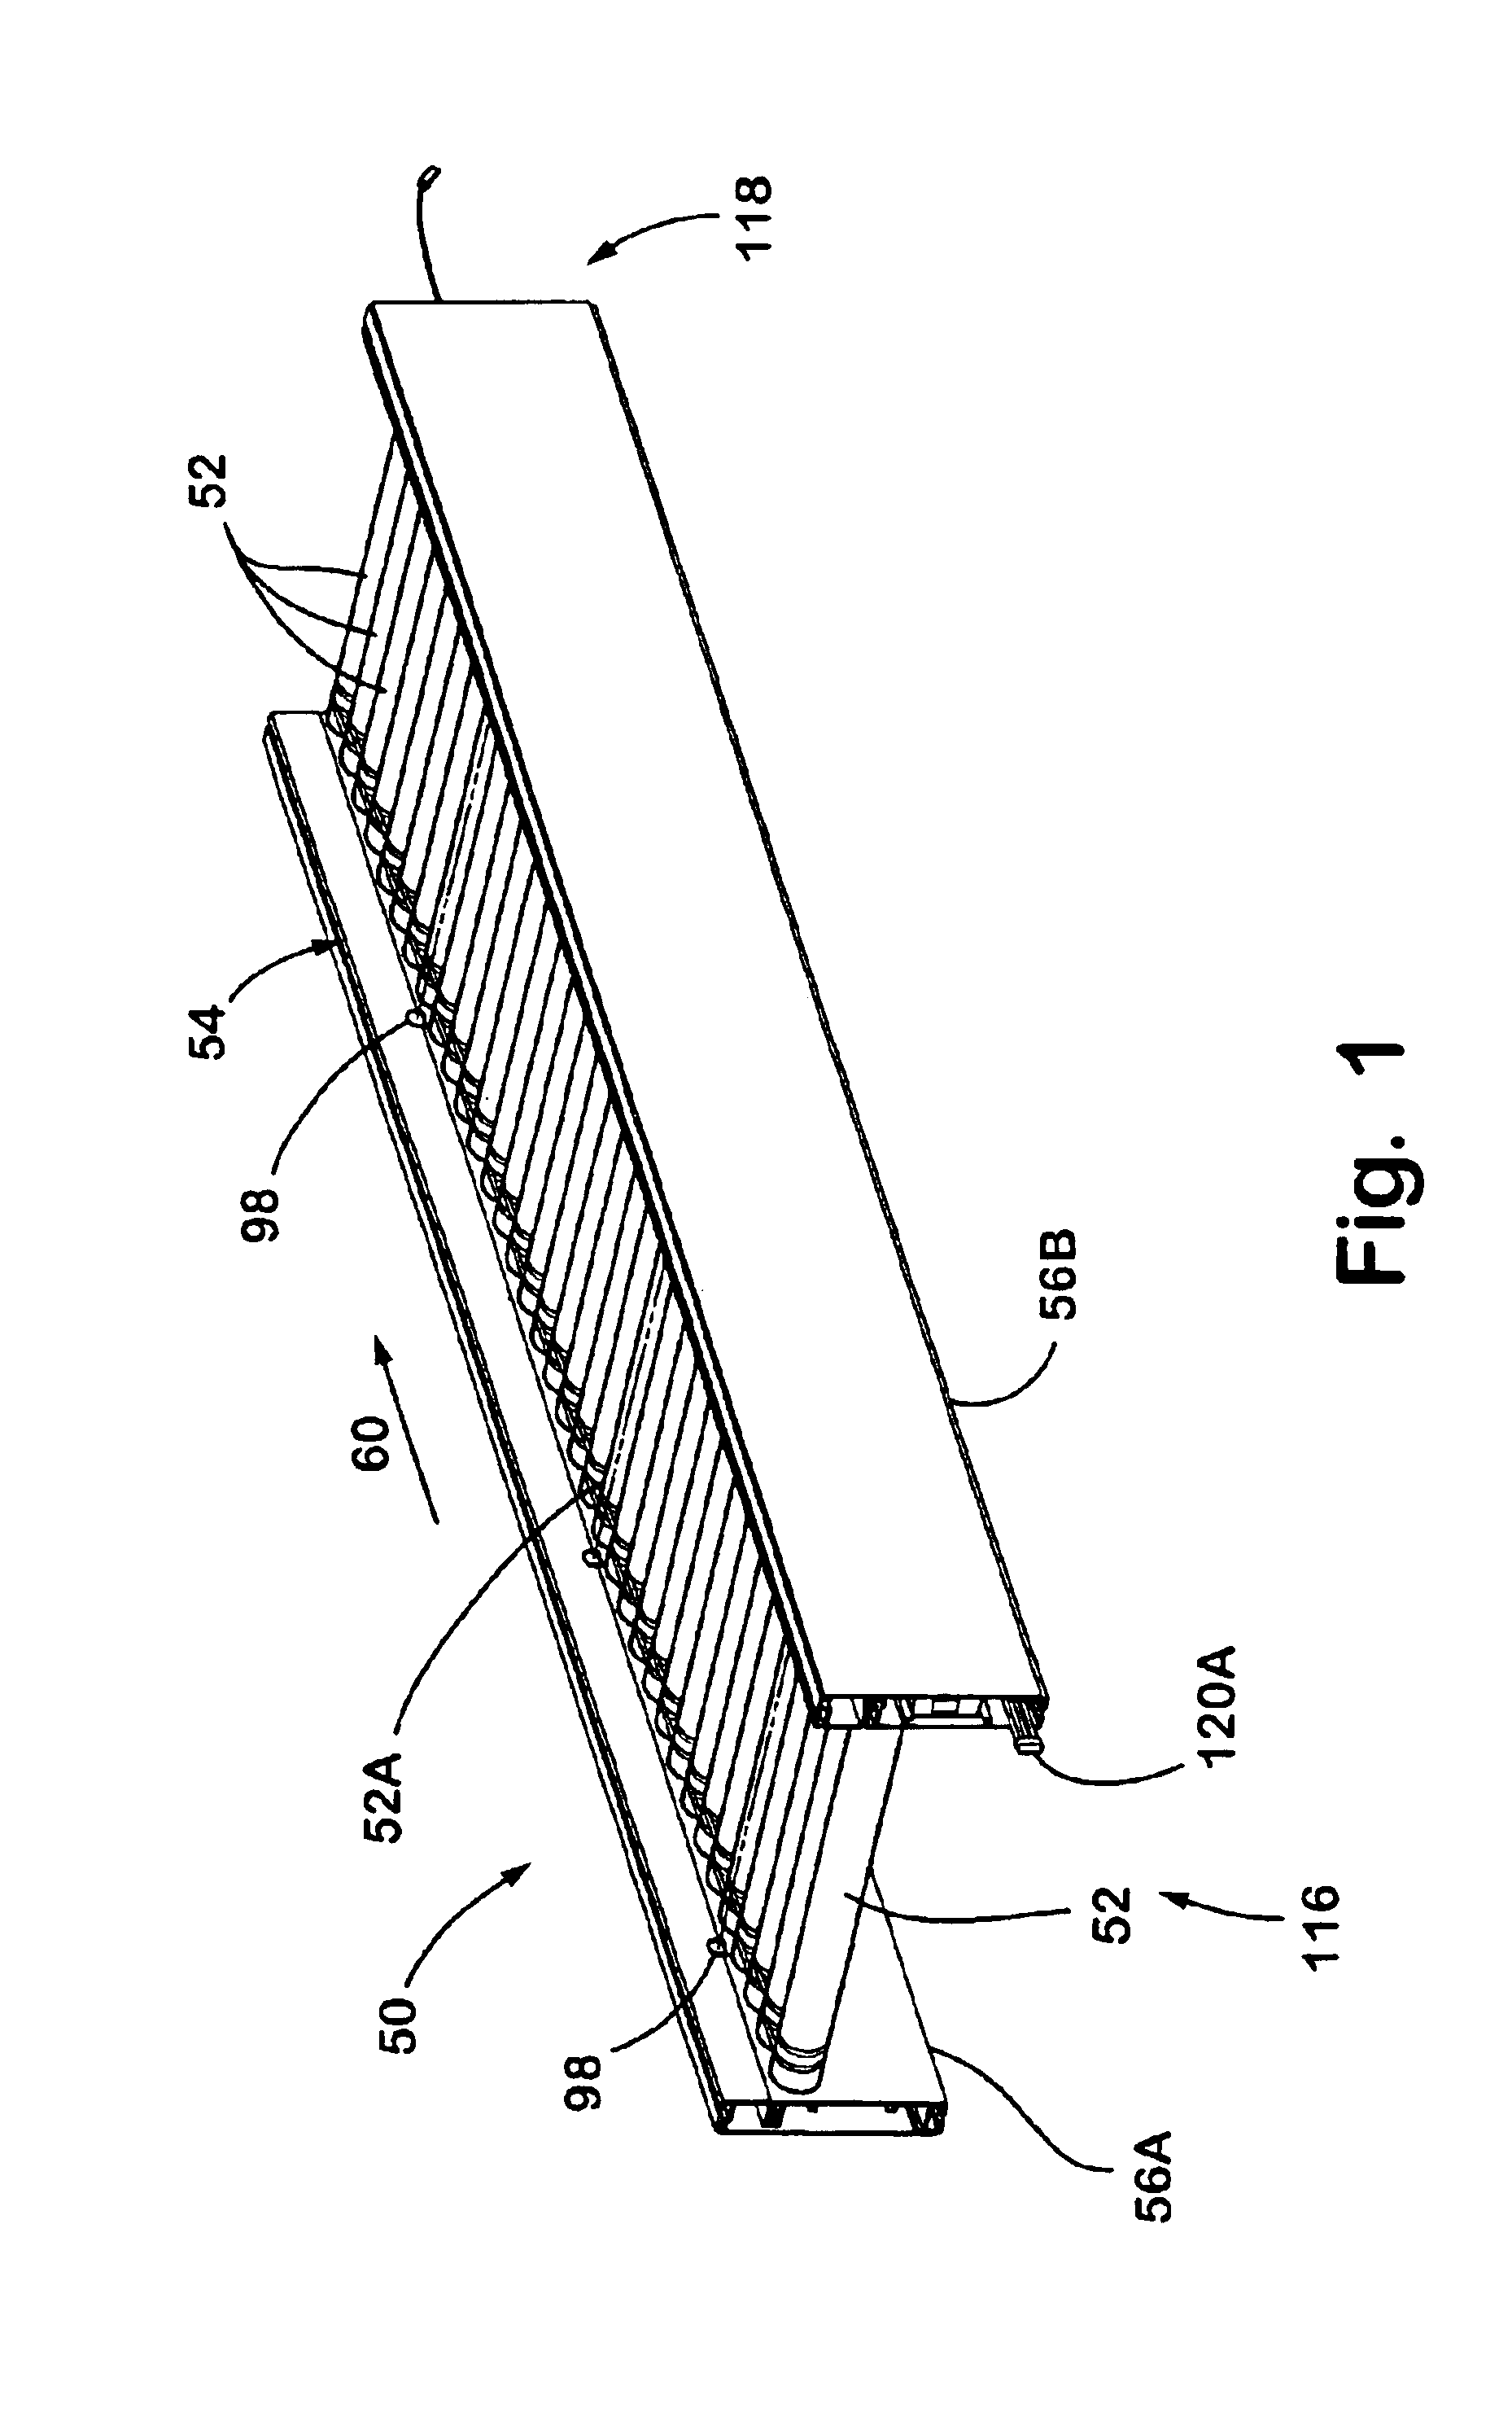 Integrated conveyor bed